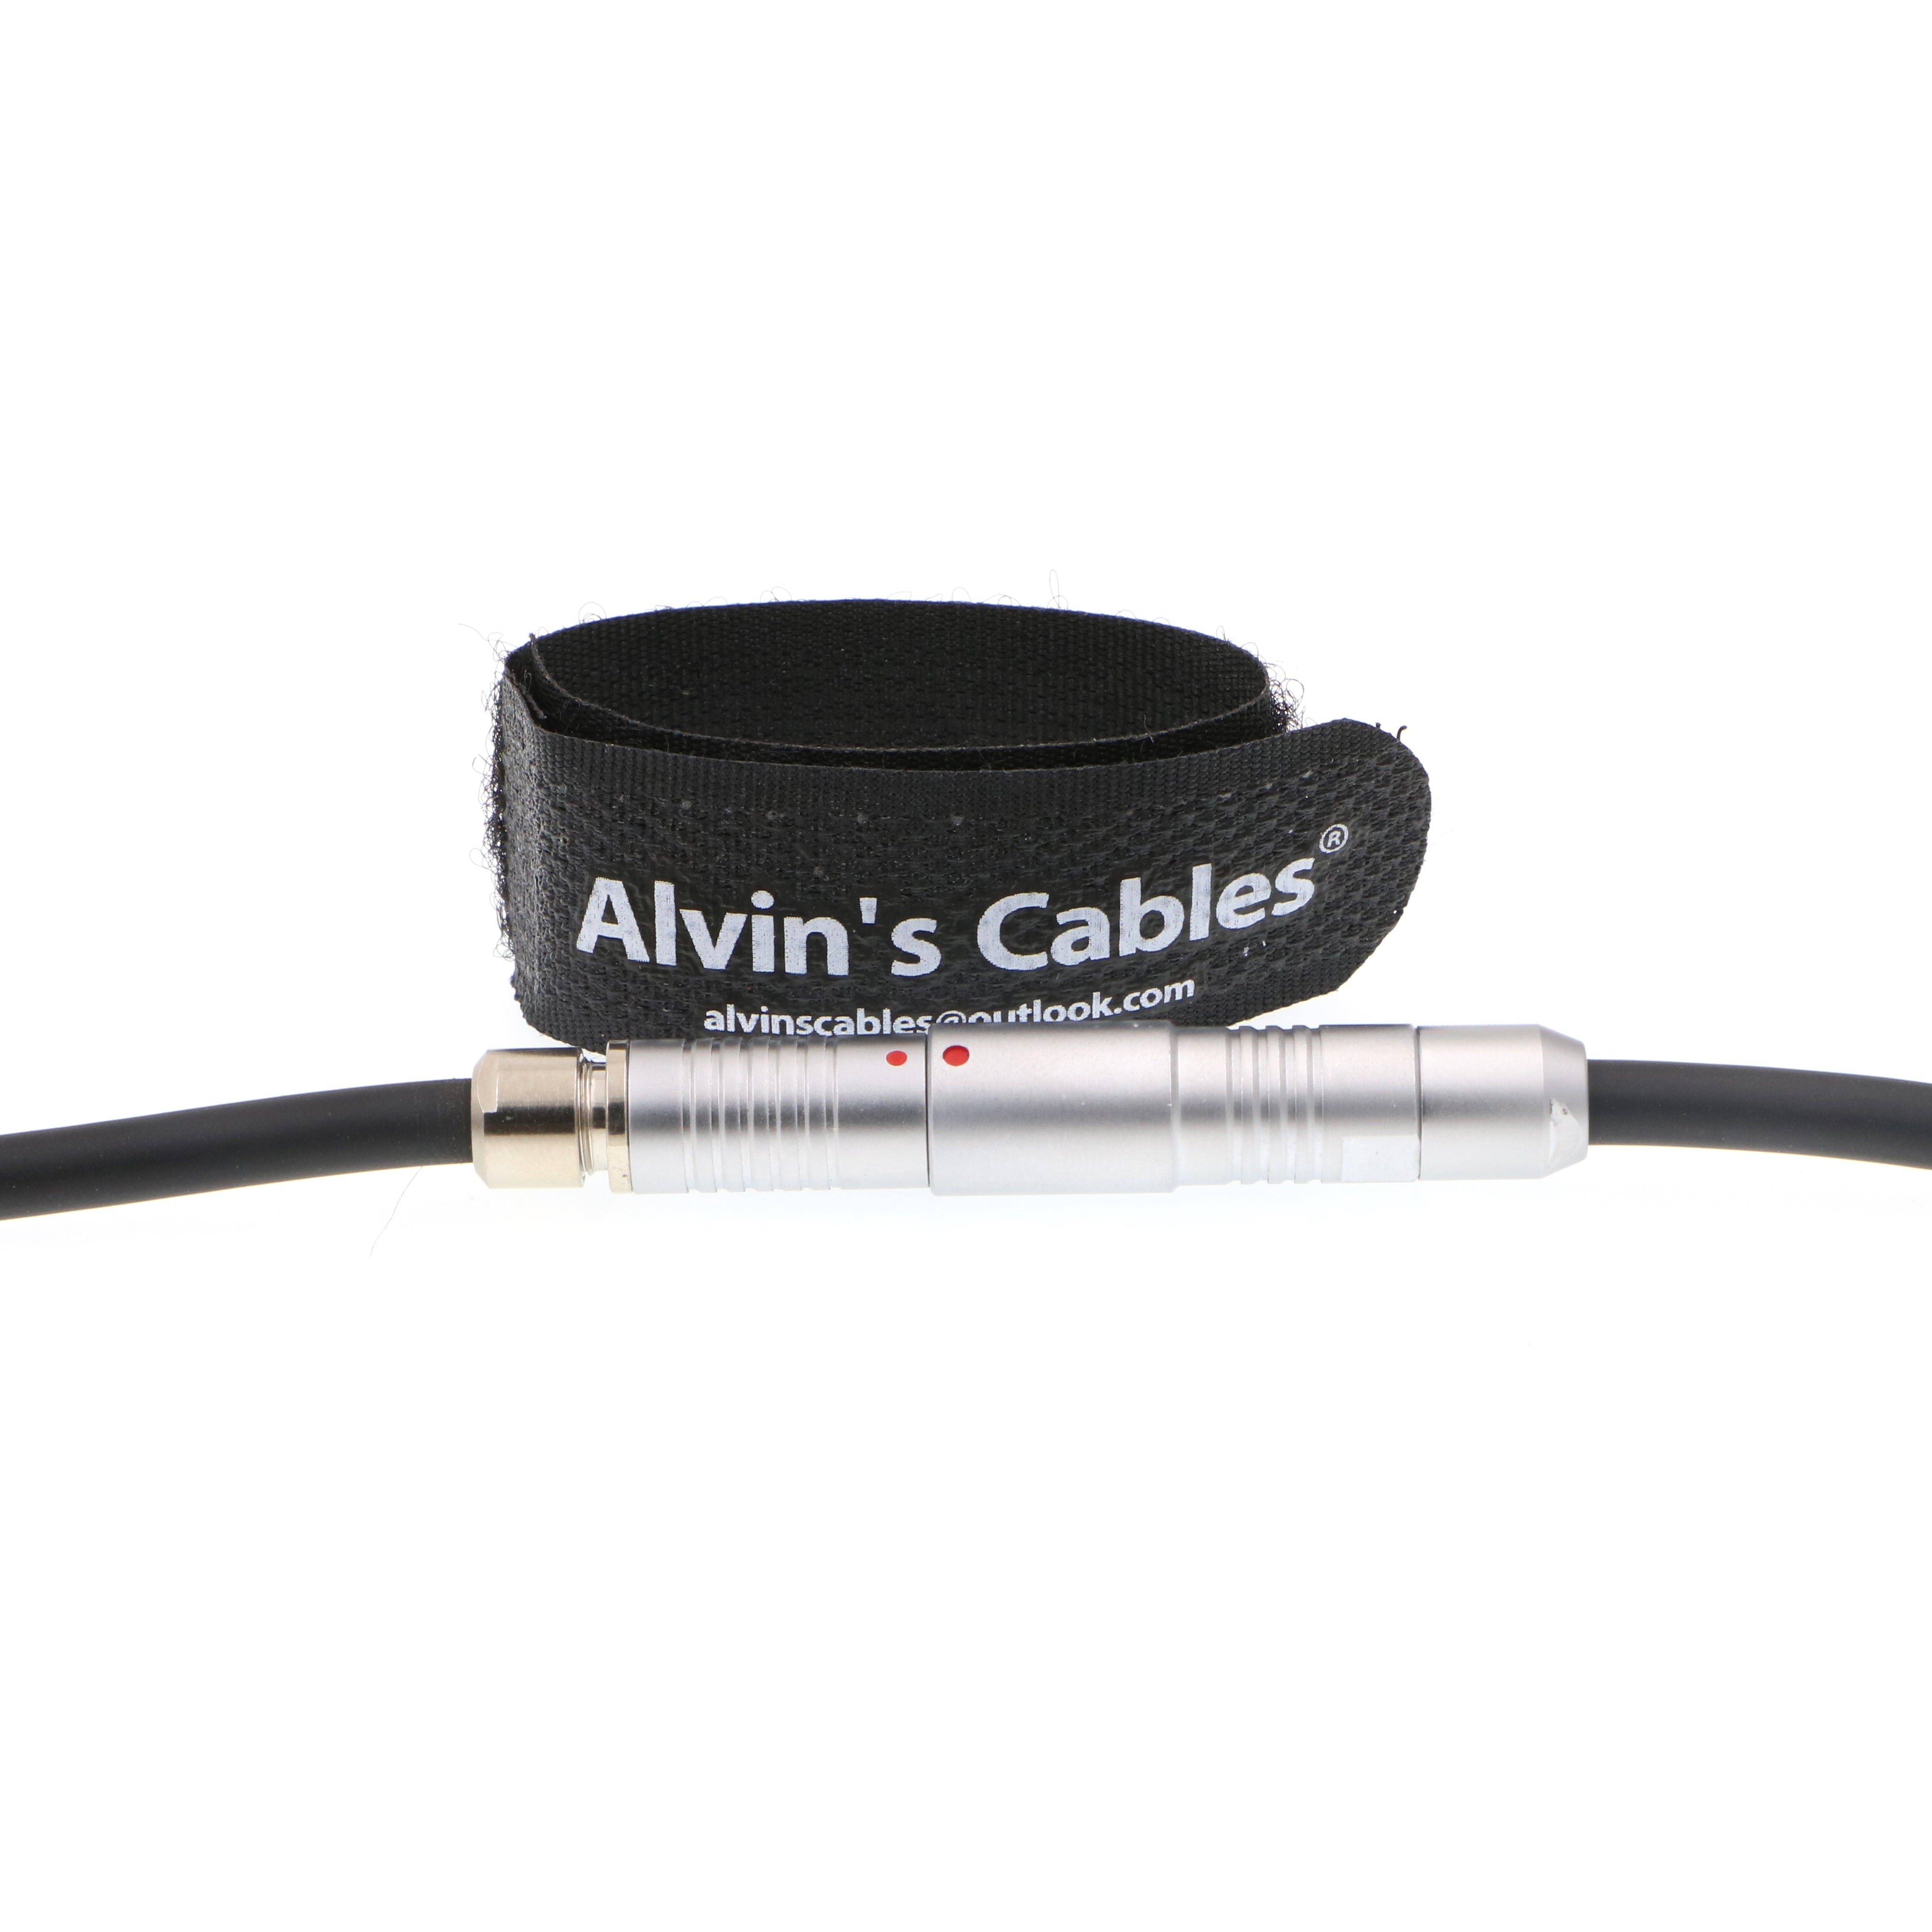 Alvin's Cables Arri 3 Pin Run Stop Extension Cable 3 Pin Male to 3 Pin Female for ARRI WVT-1 Transmitter, a WVR-1 Receiver, or a UMC-4 Controller